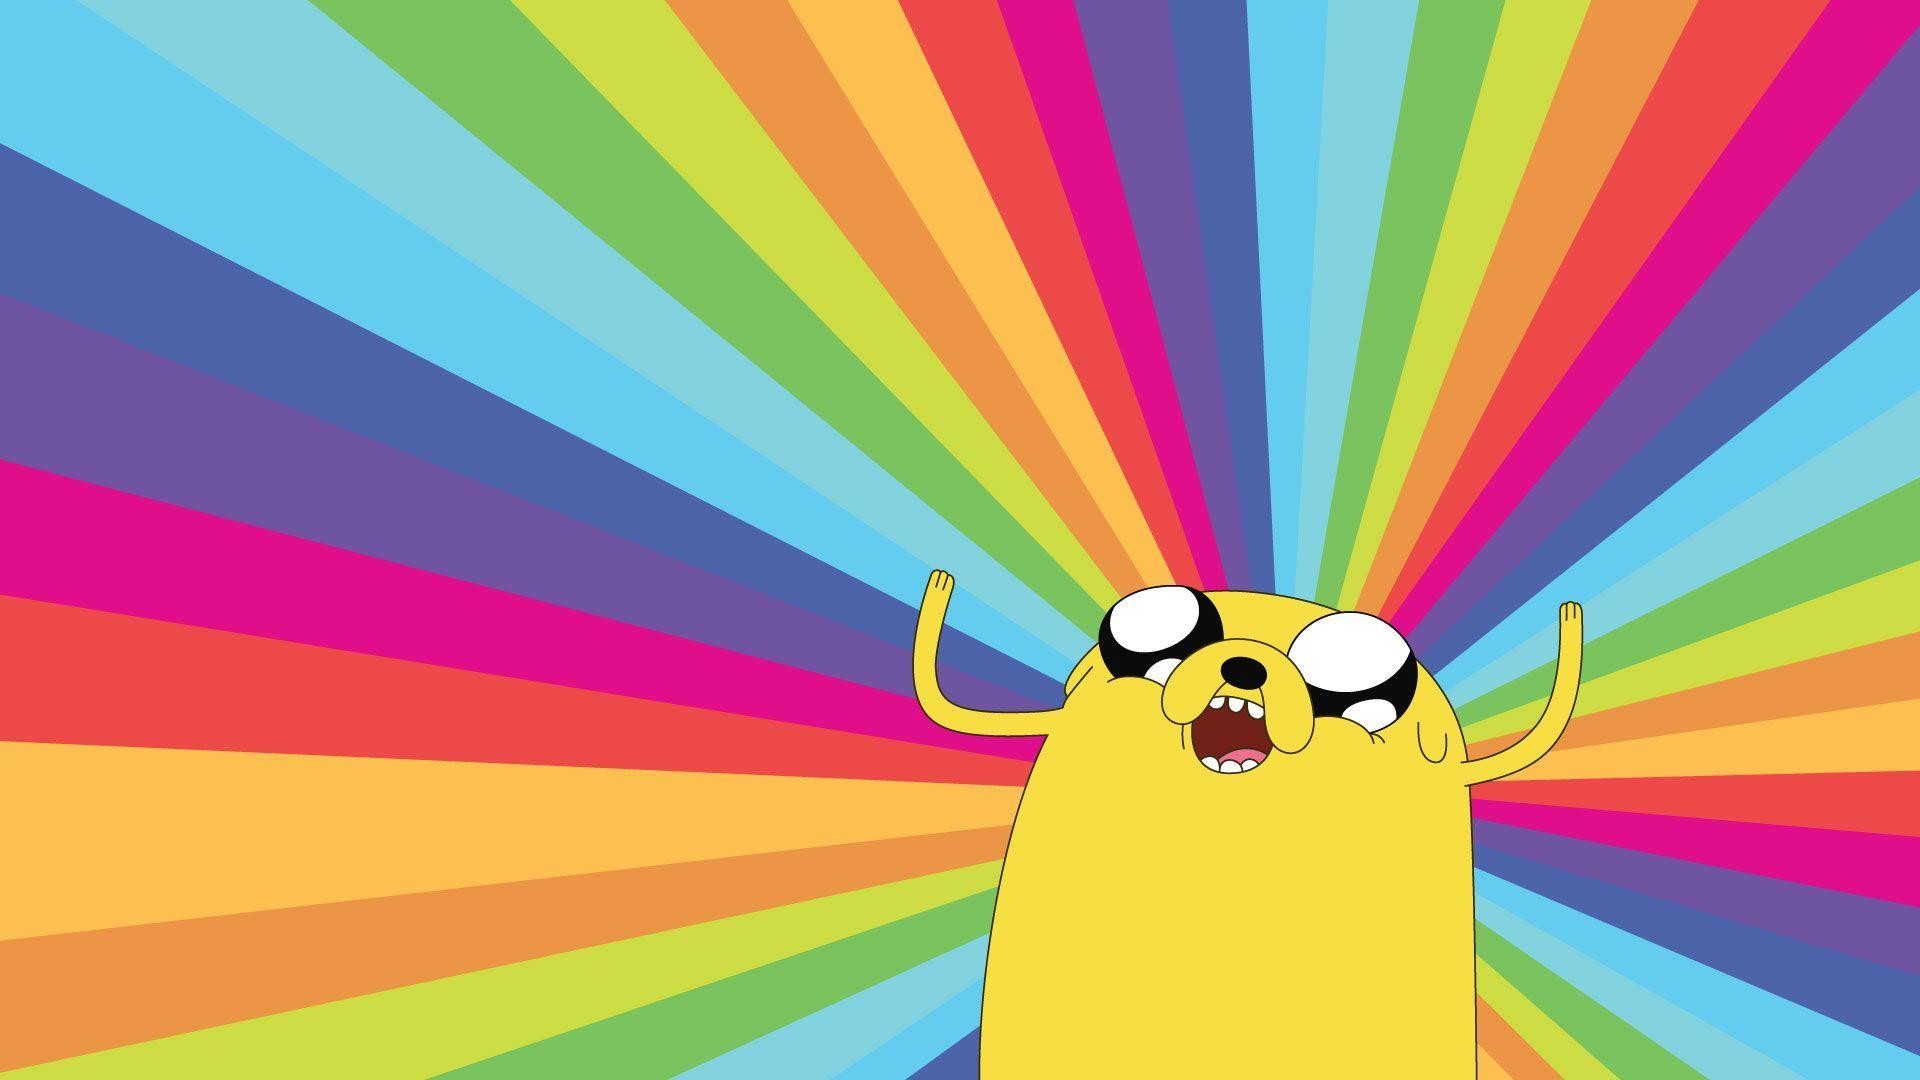 1920x1080 Excellent Adventure Time Wallpapers Hd Iphone PX .